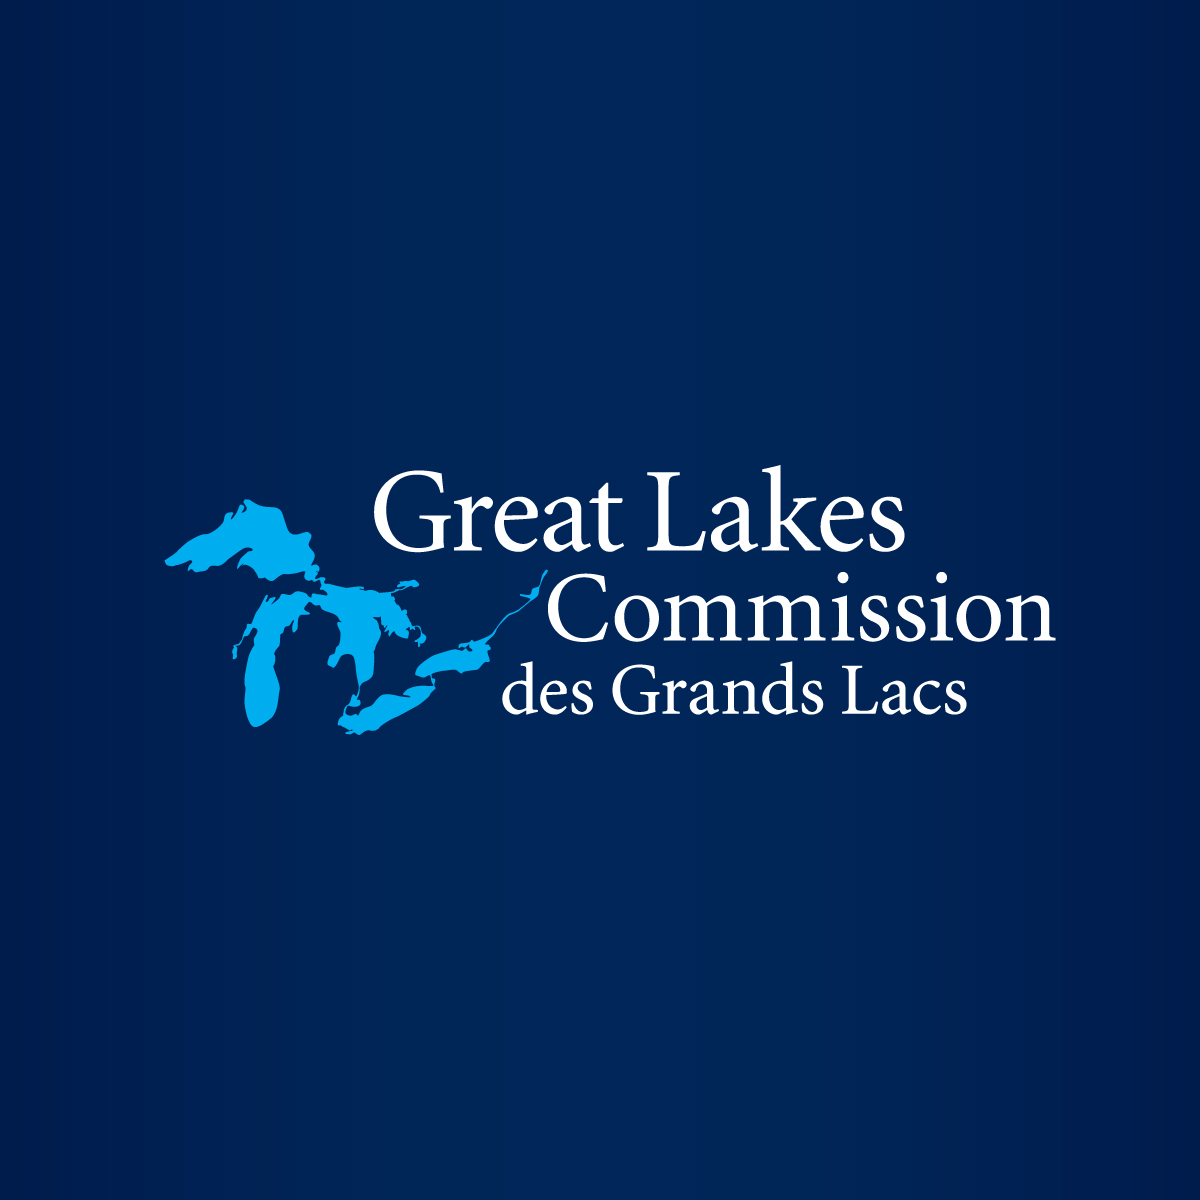 Speakers to share Great Lakes stories at group’s third virtual event